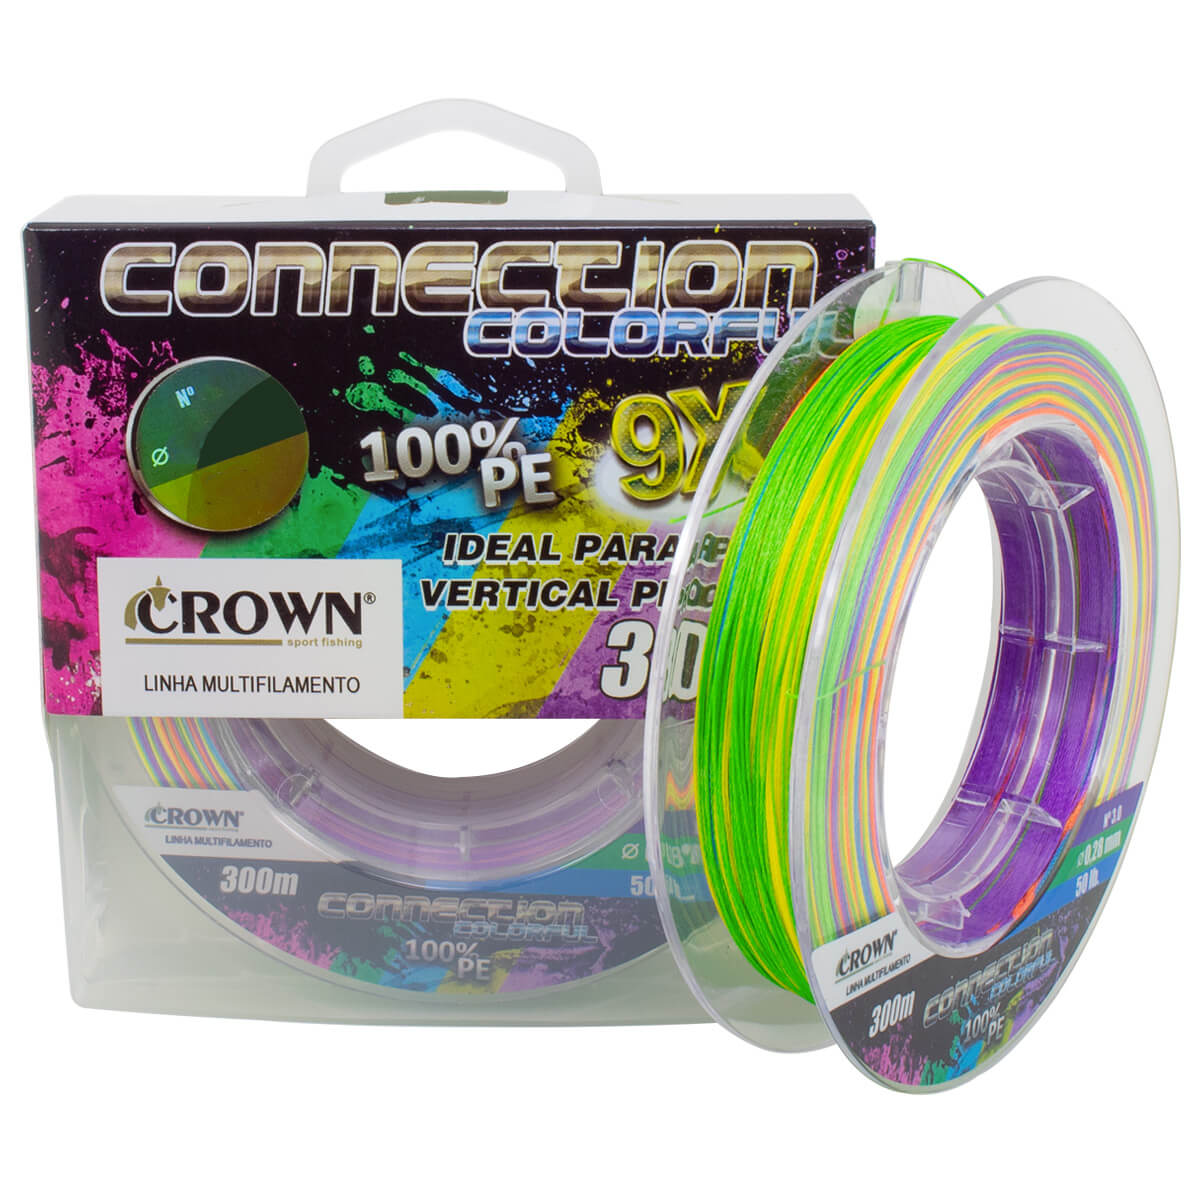 LINHA MULTIFILAMENTO CROWN CONNECTION COLORFUL 9X - 300M